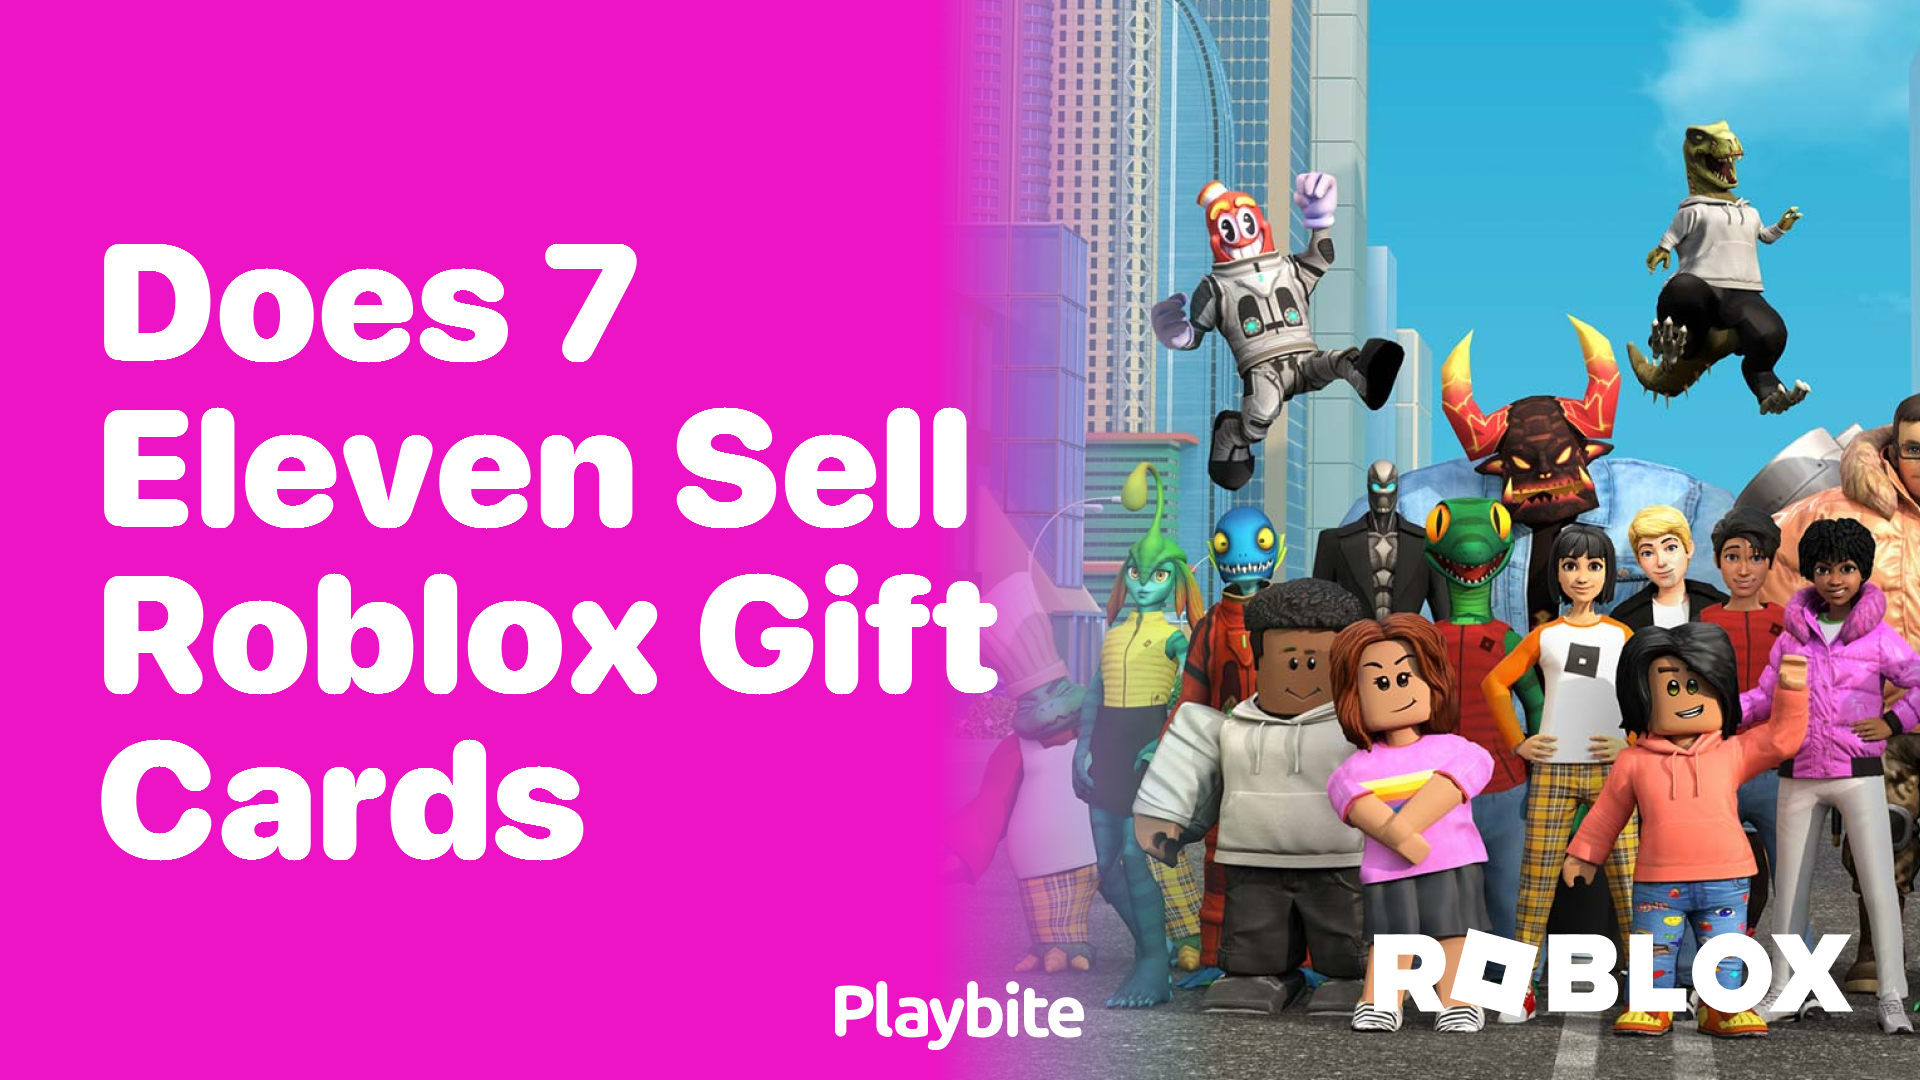 Does 7-Eleven Sell Roblox Gift Cards? Find Out Here!